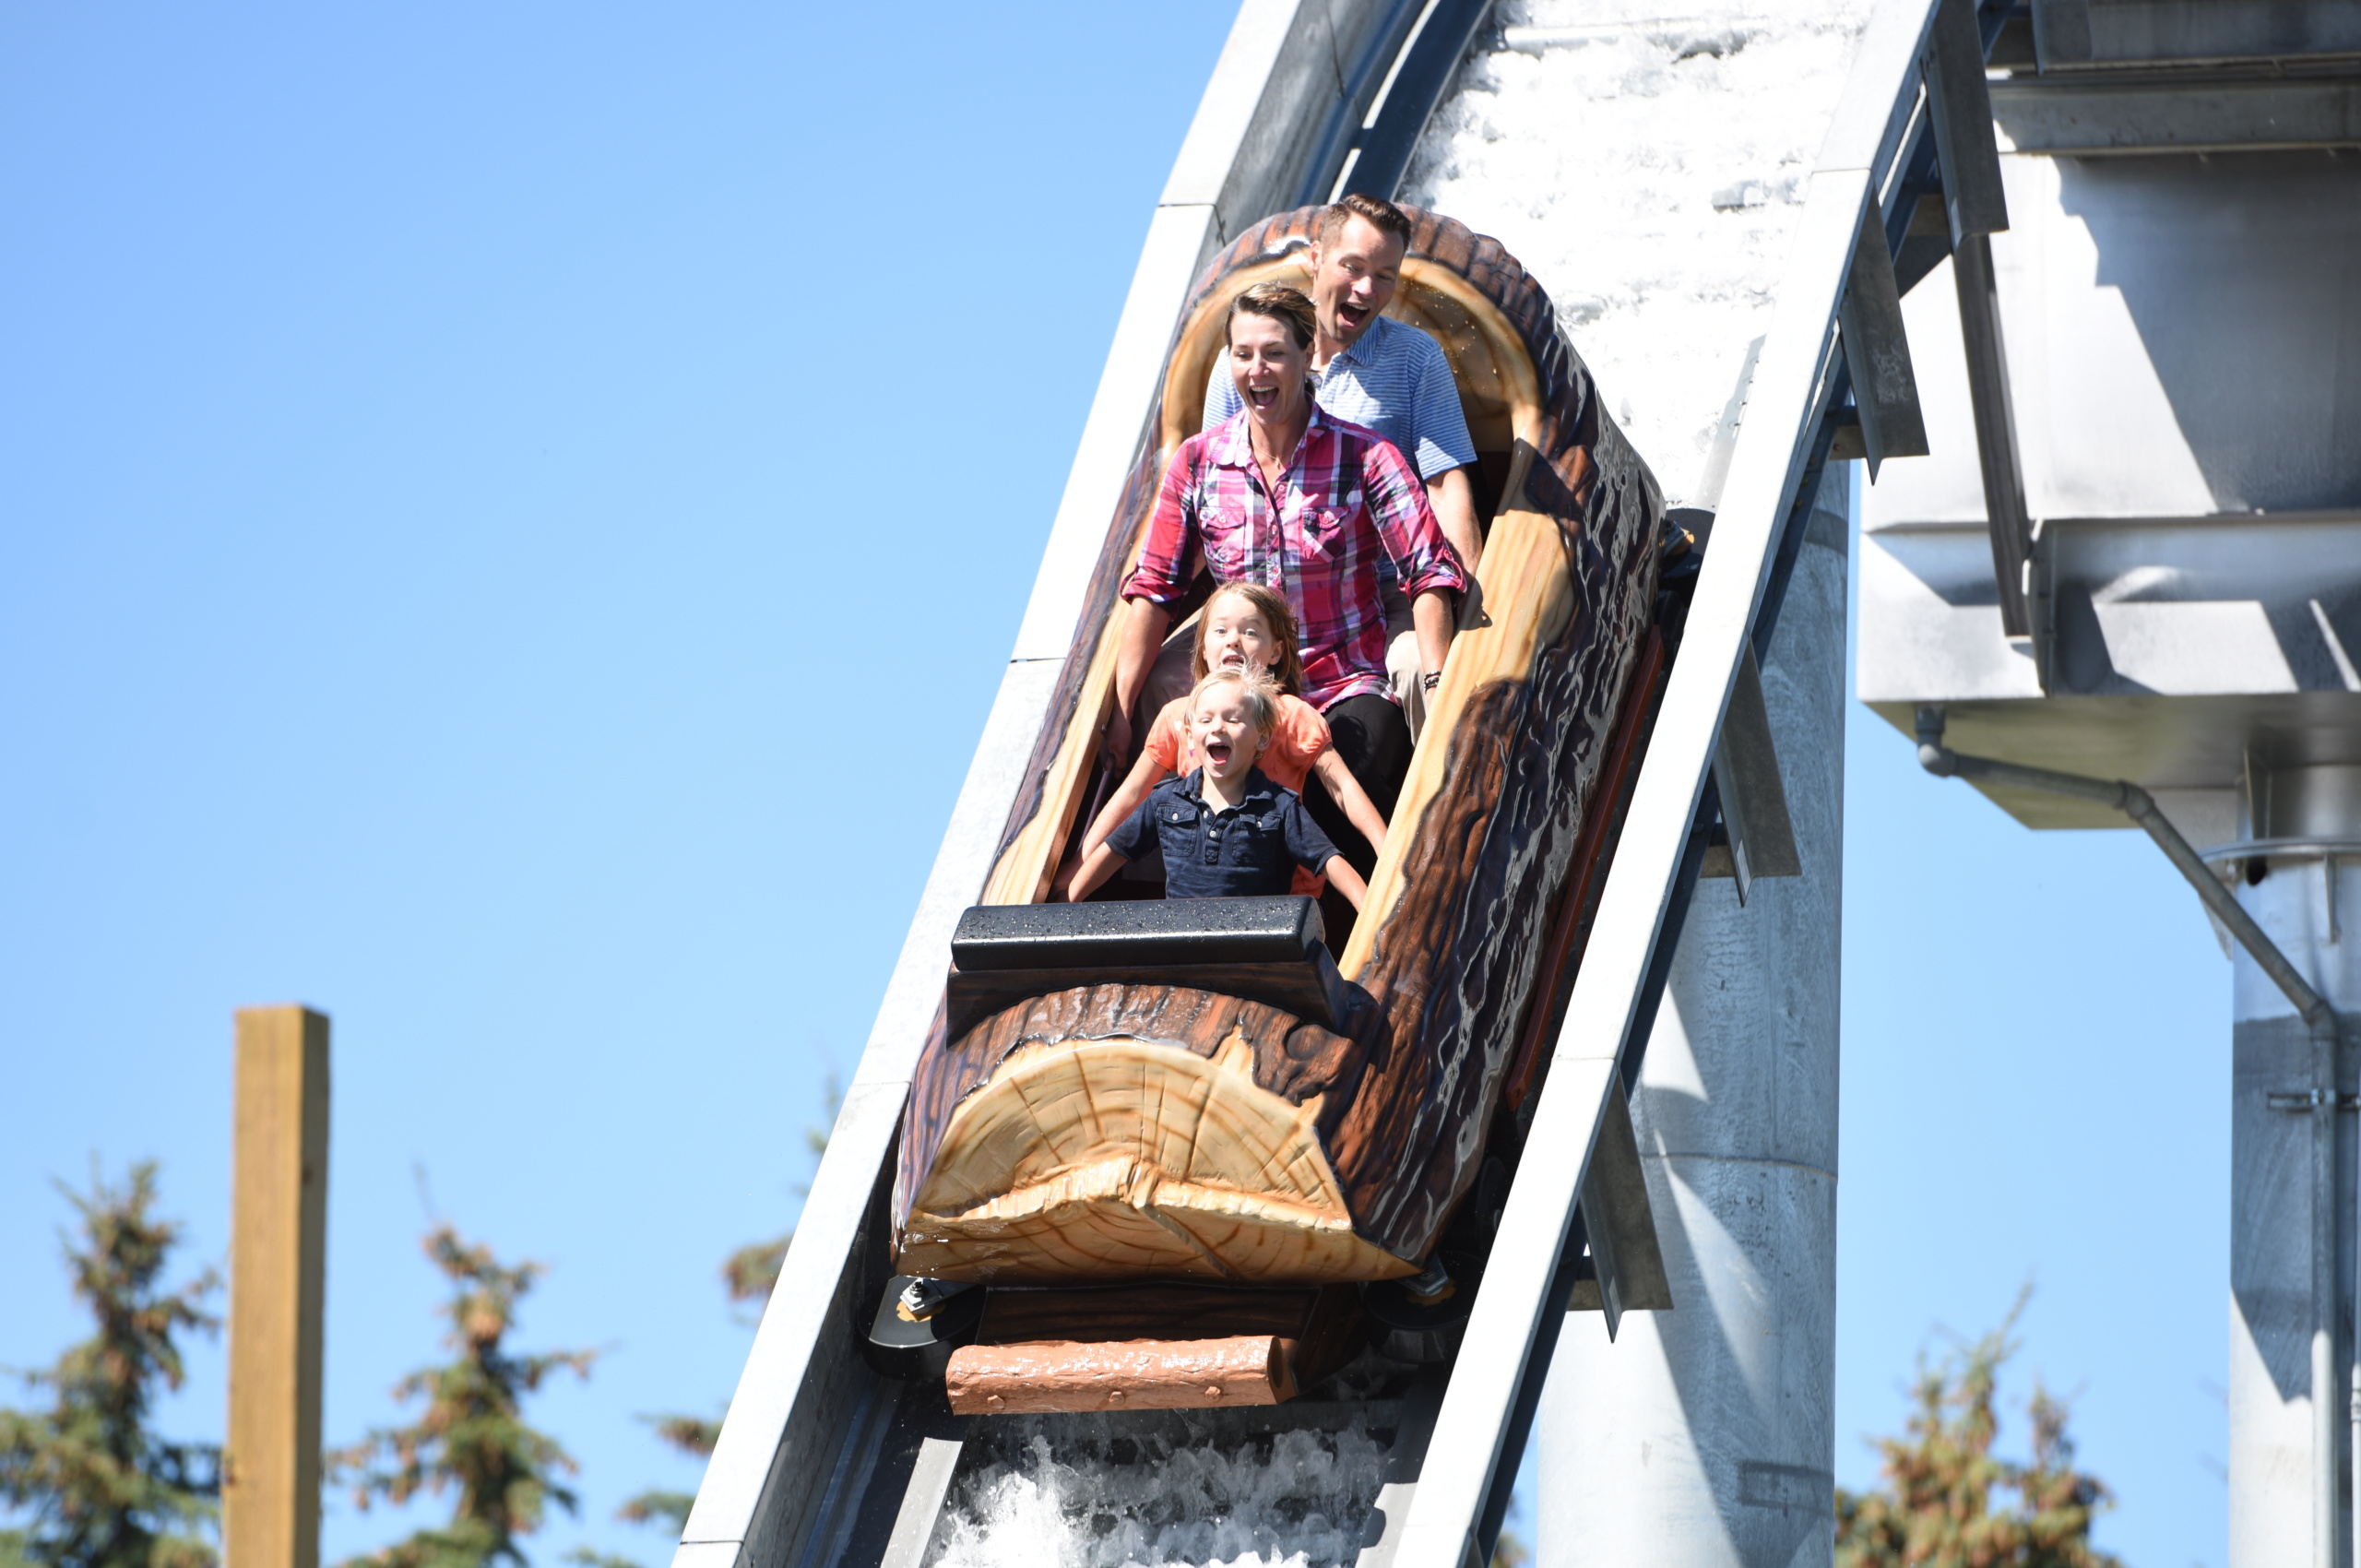 Two adults and two children in a boat going down log flume ride